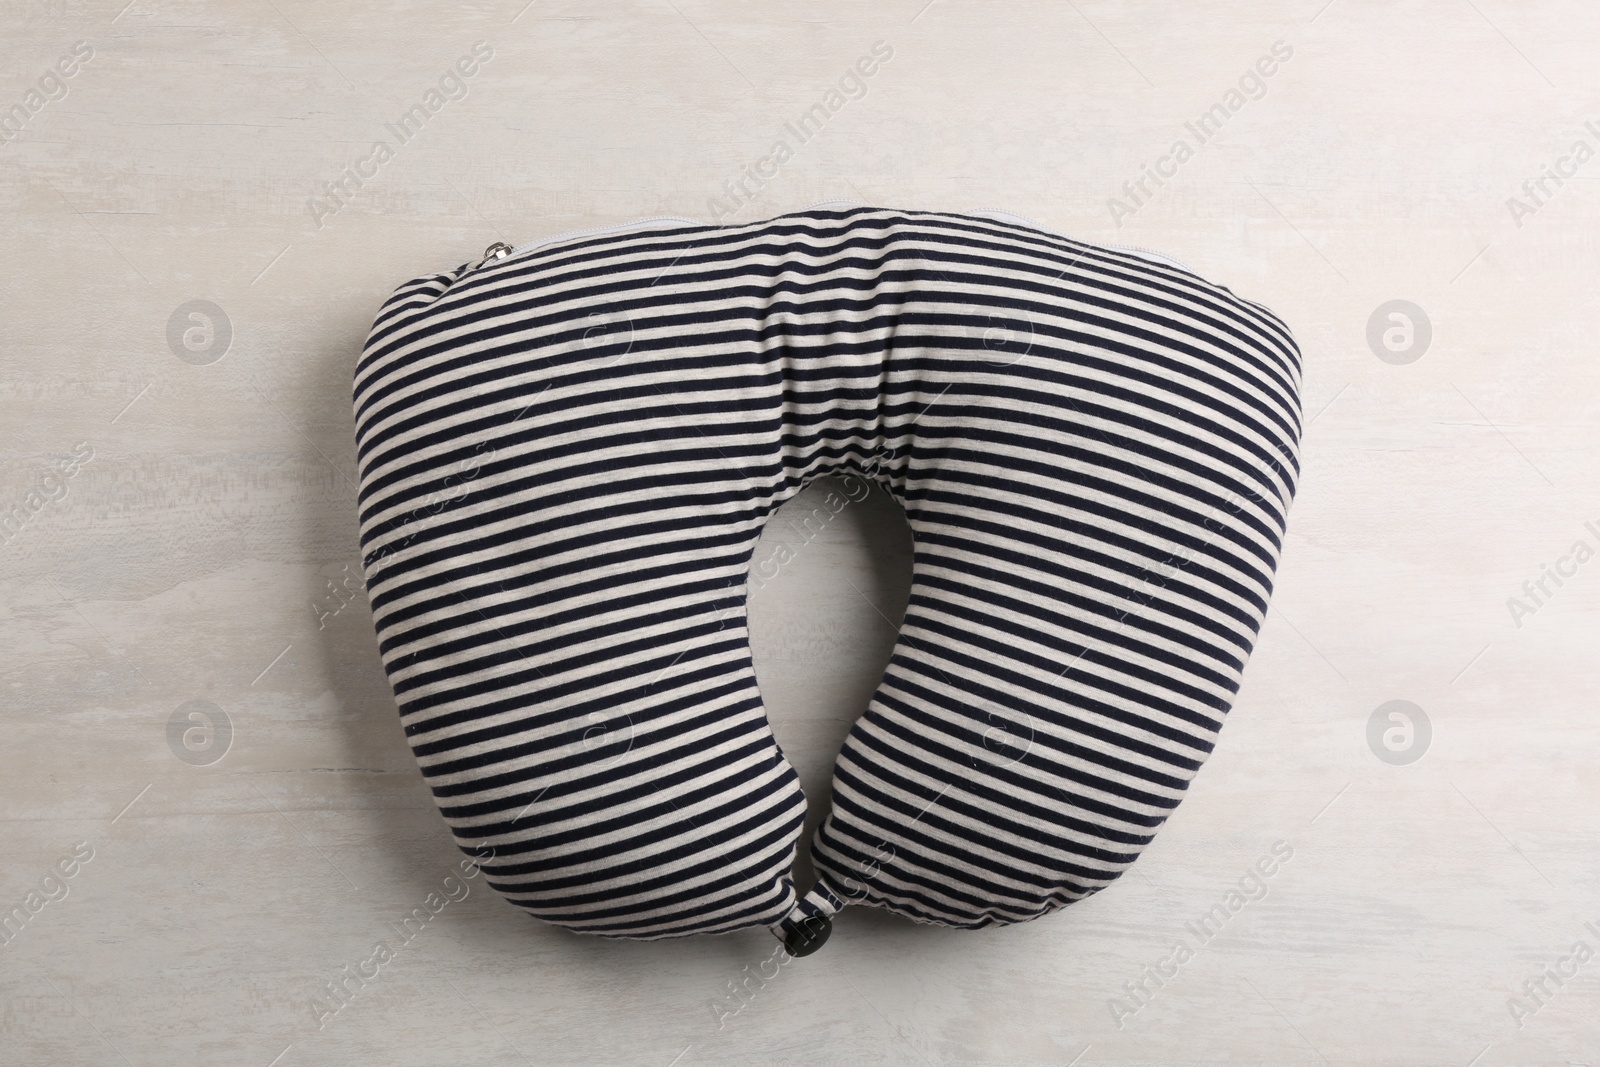 Image of Striped travel pillow on light background, top view